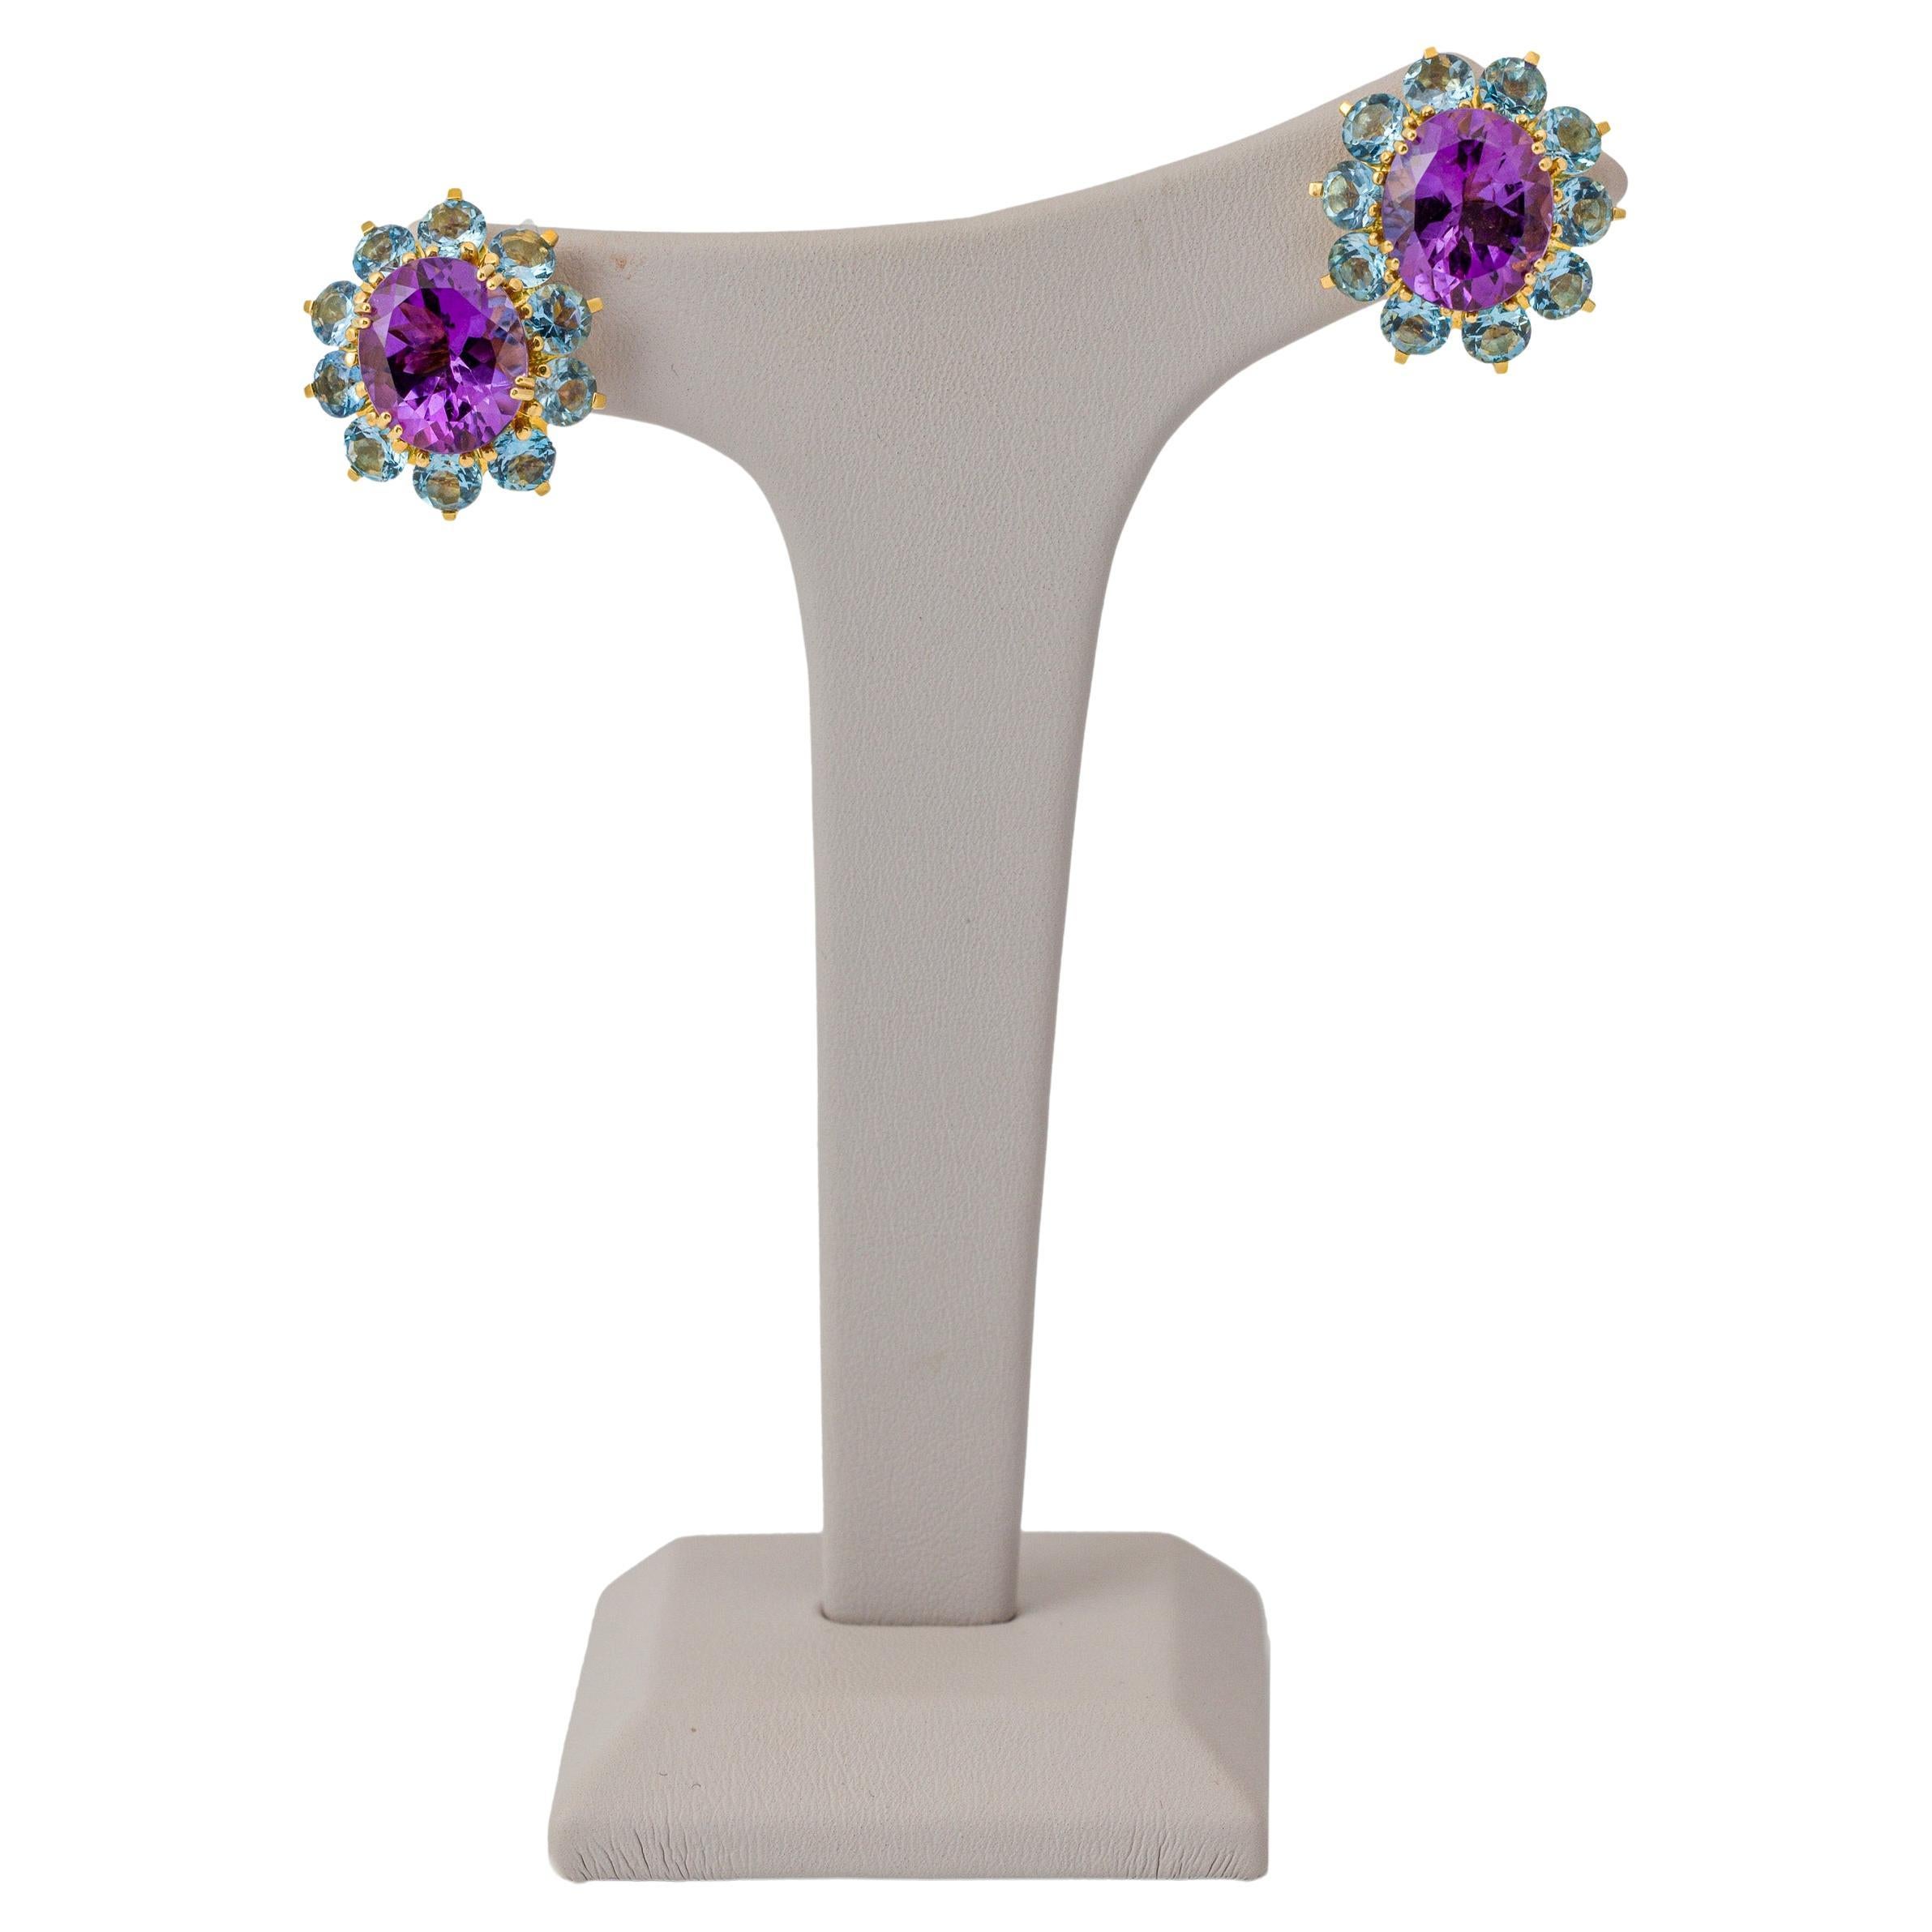 "Costis" Imperial Rosette Earrings - Central Amethysts, Aquamarines in 18K Gold For Sale